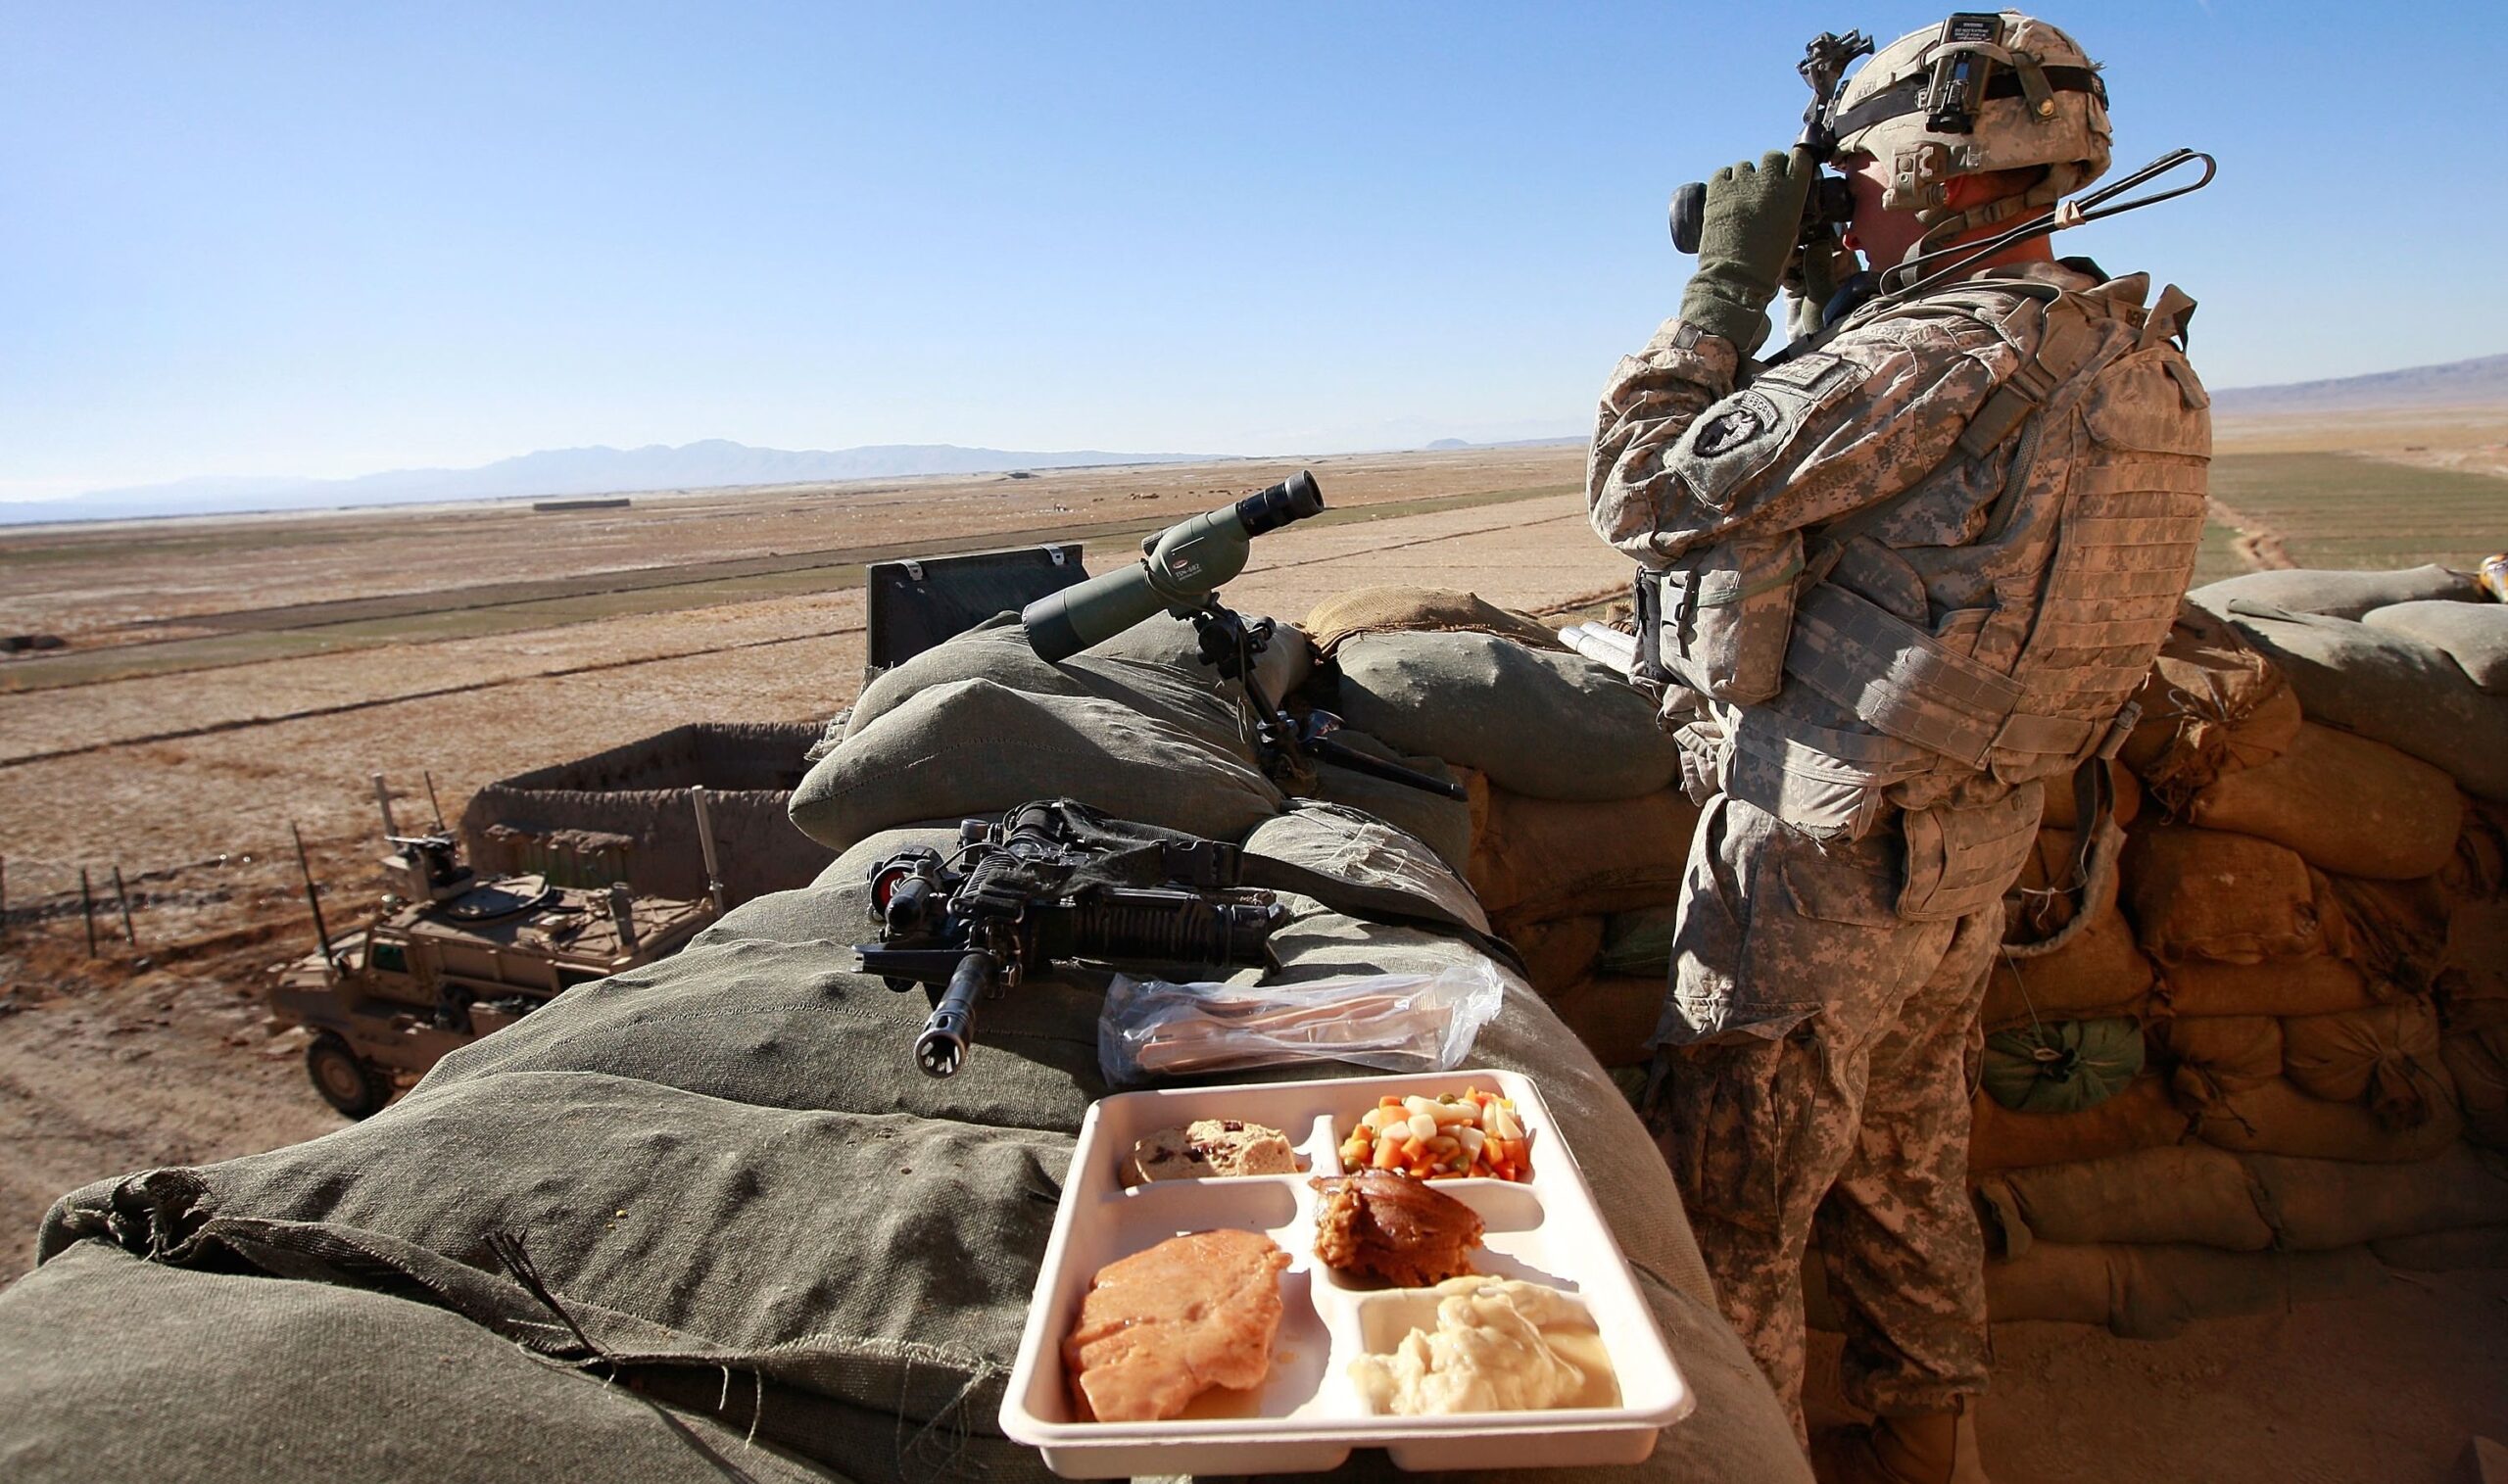 Thanks To Those On The Front Lines: Thanksgiving In Uniform